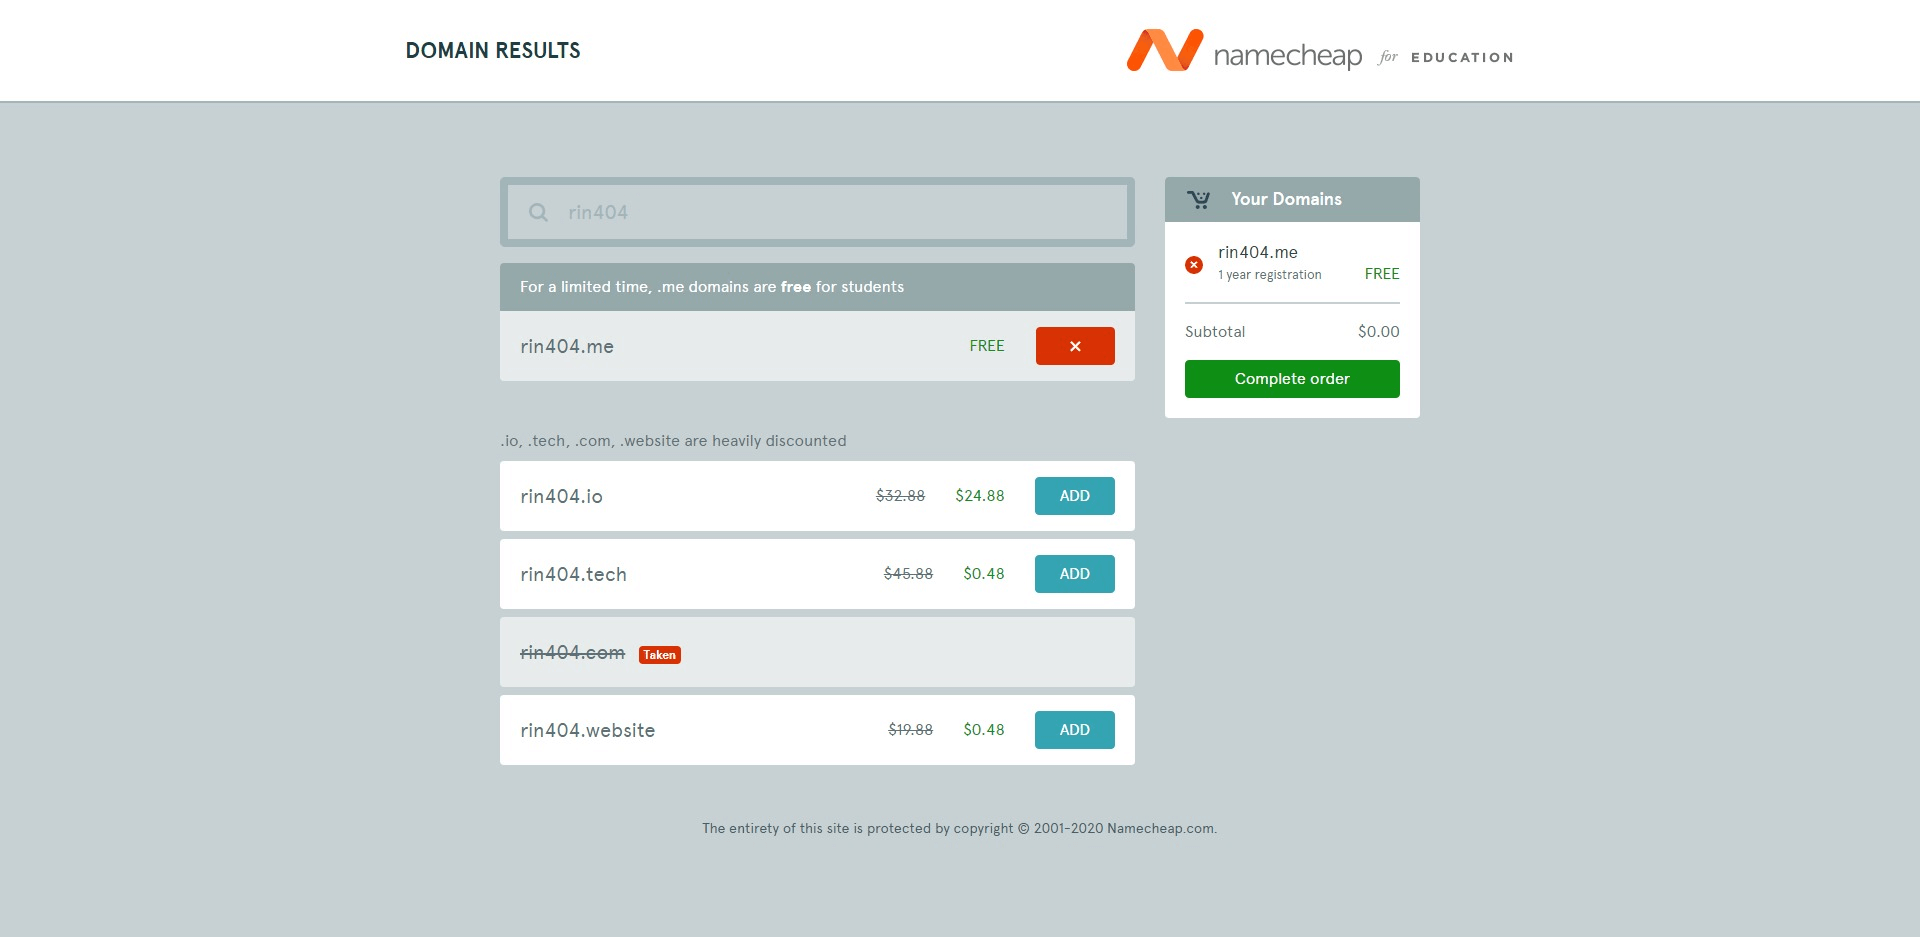 Results - Namecheap Education Program  Free Domains for Students